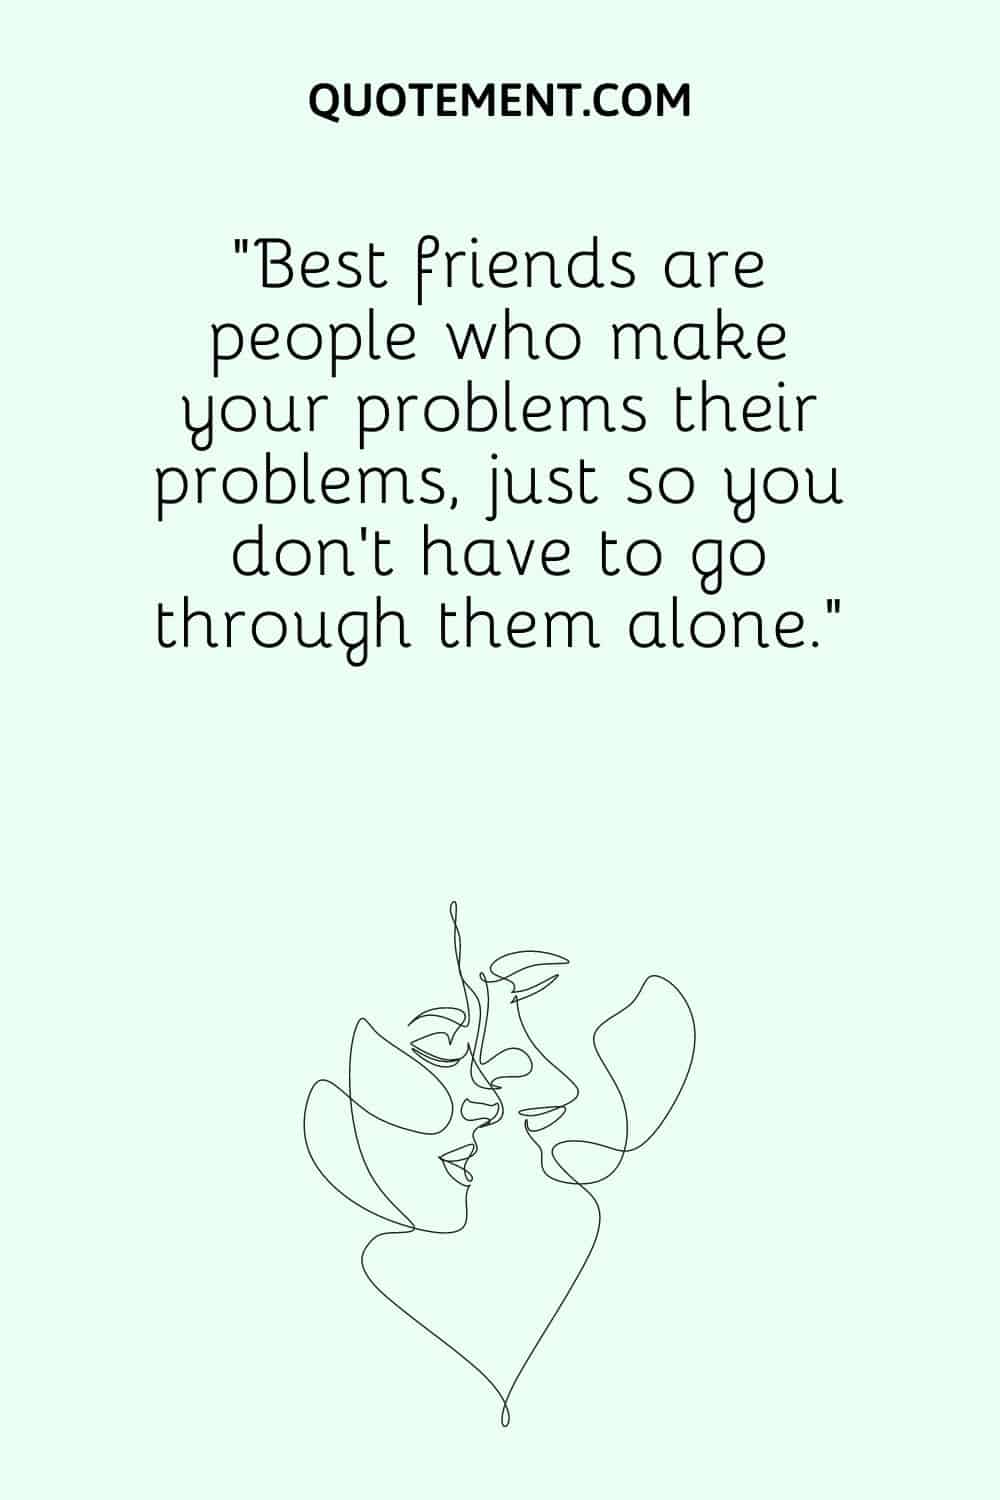 “Best friends are people who make your problems their problems, just so you don’t have to go through them alone.”